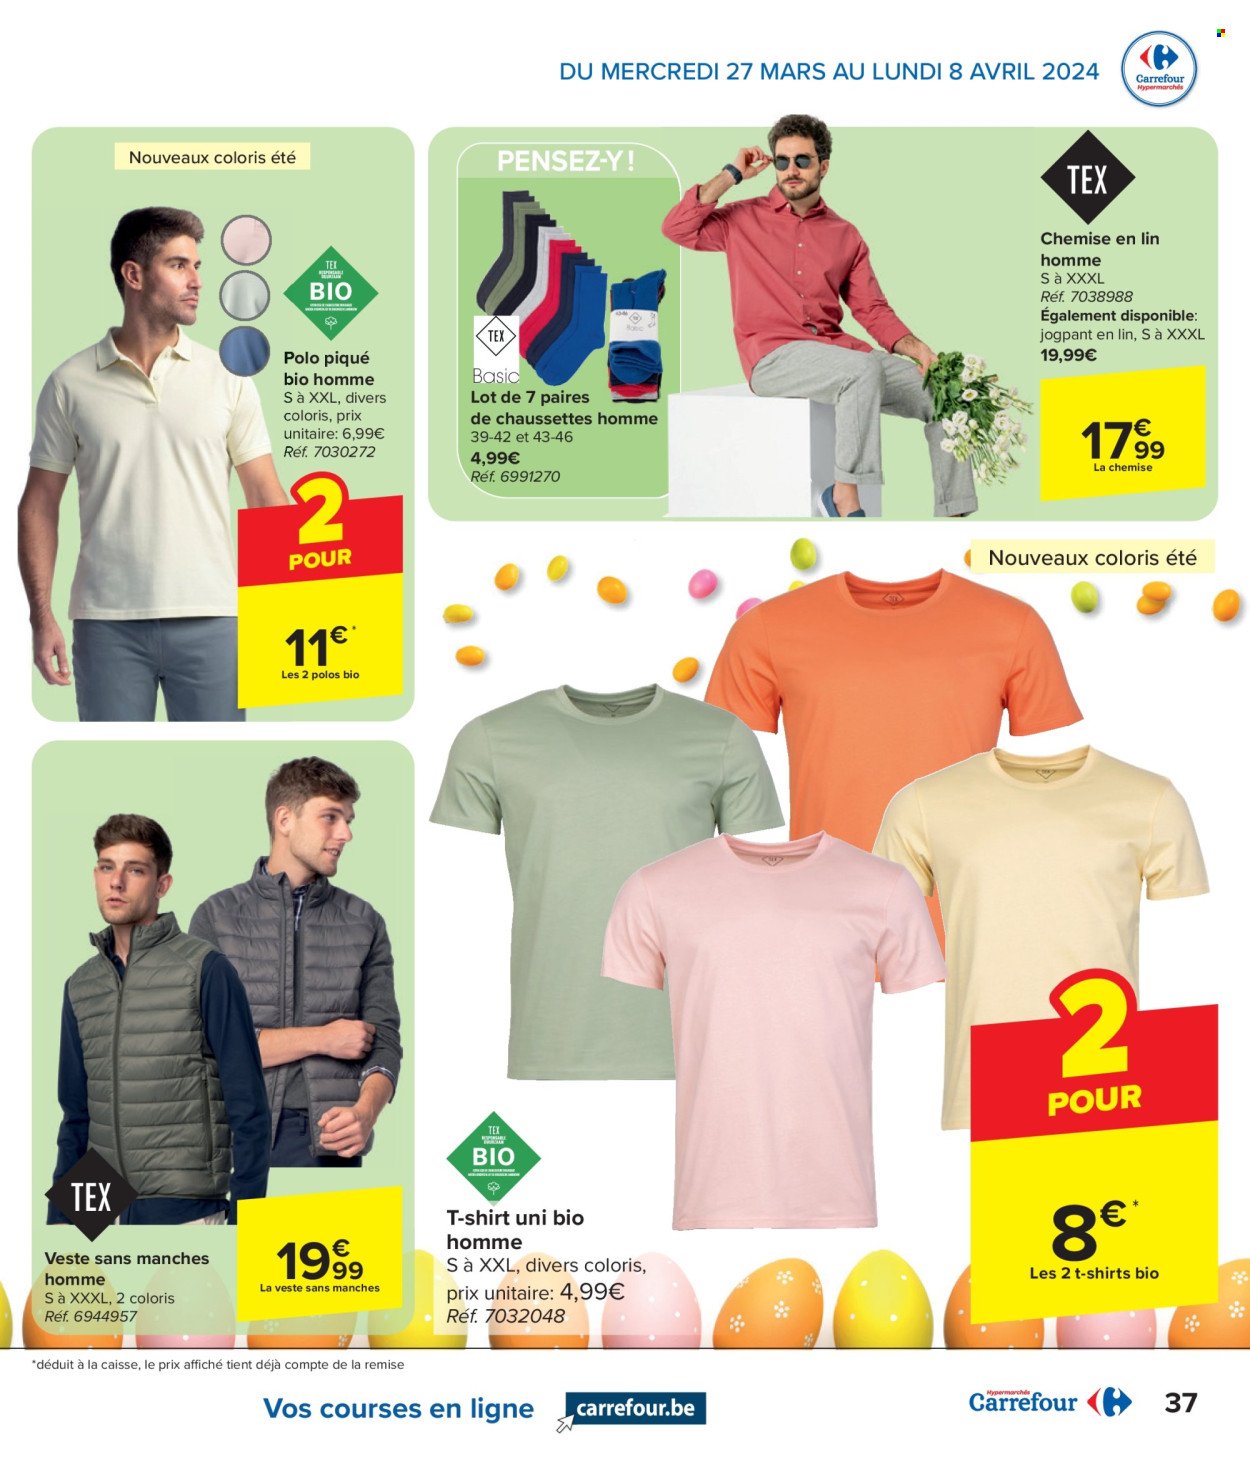 Catalogue Carrefour hypermarkt - 27.3.2024 - 8.4.2024. Page 37.